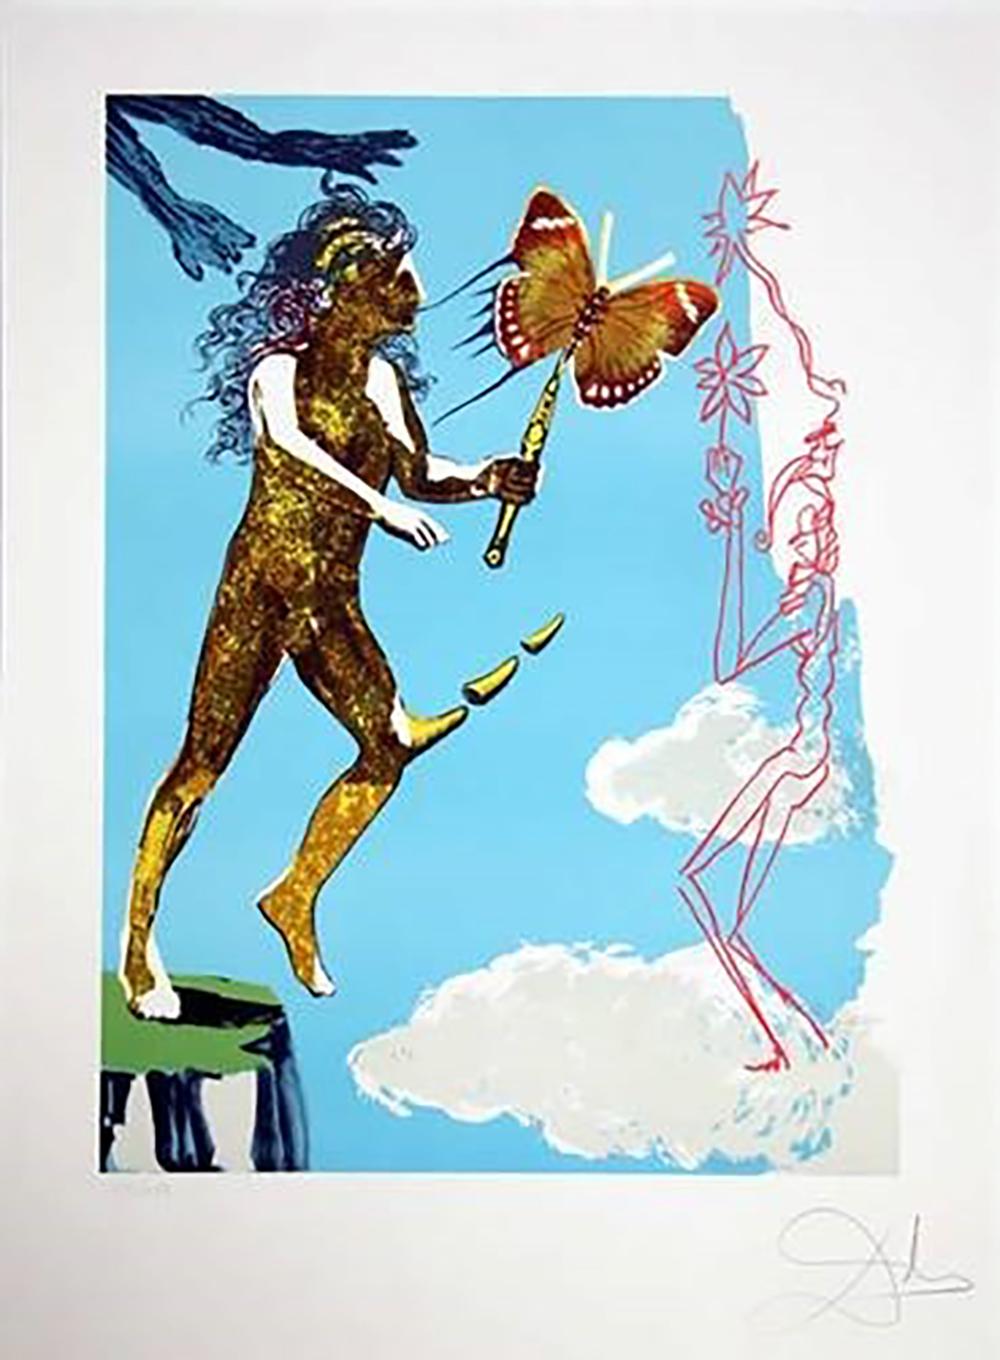 Salvador Dalí Figurative Print - Release of the Psychic Spirit from Magic Butterfly & the Dream Suite